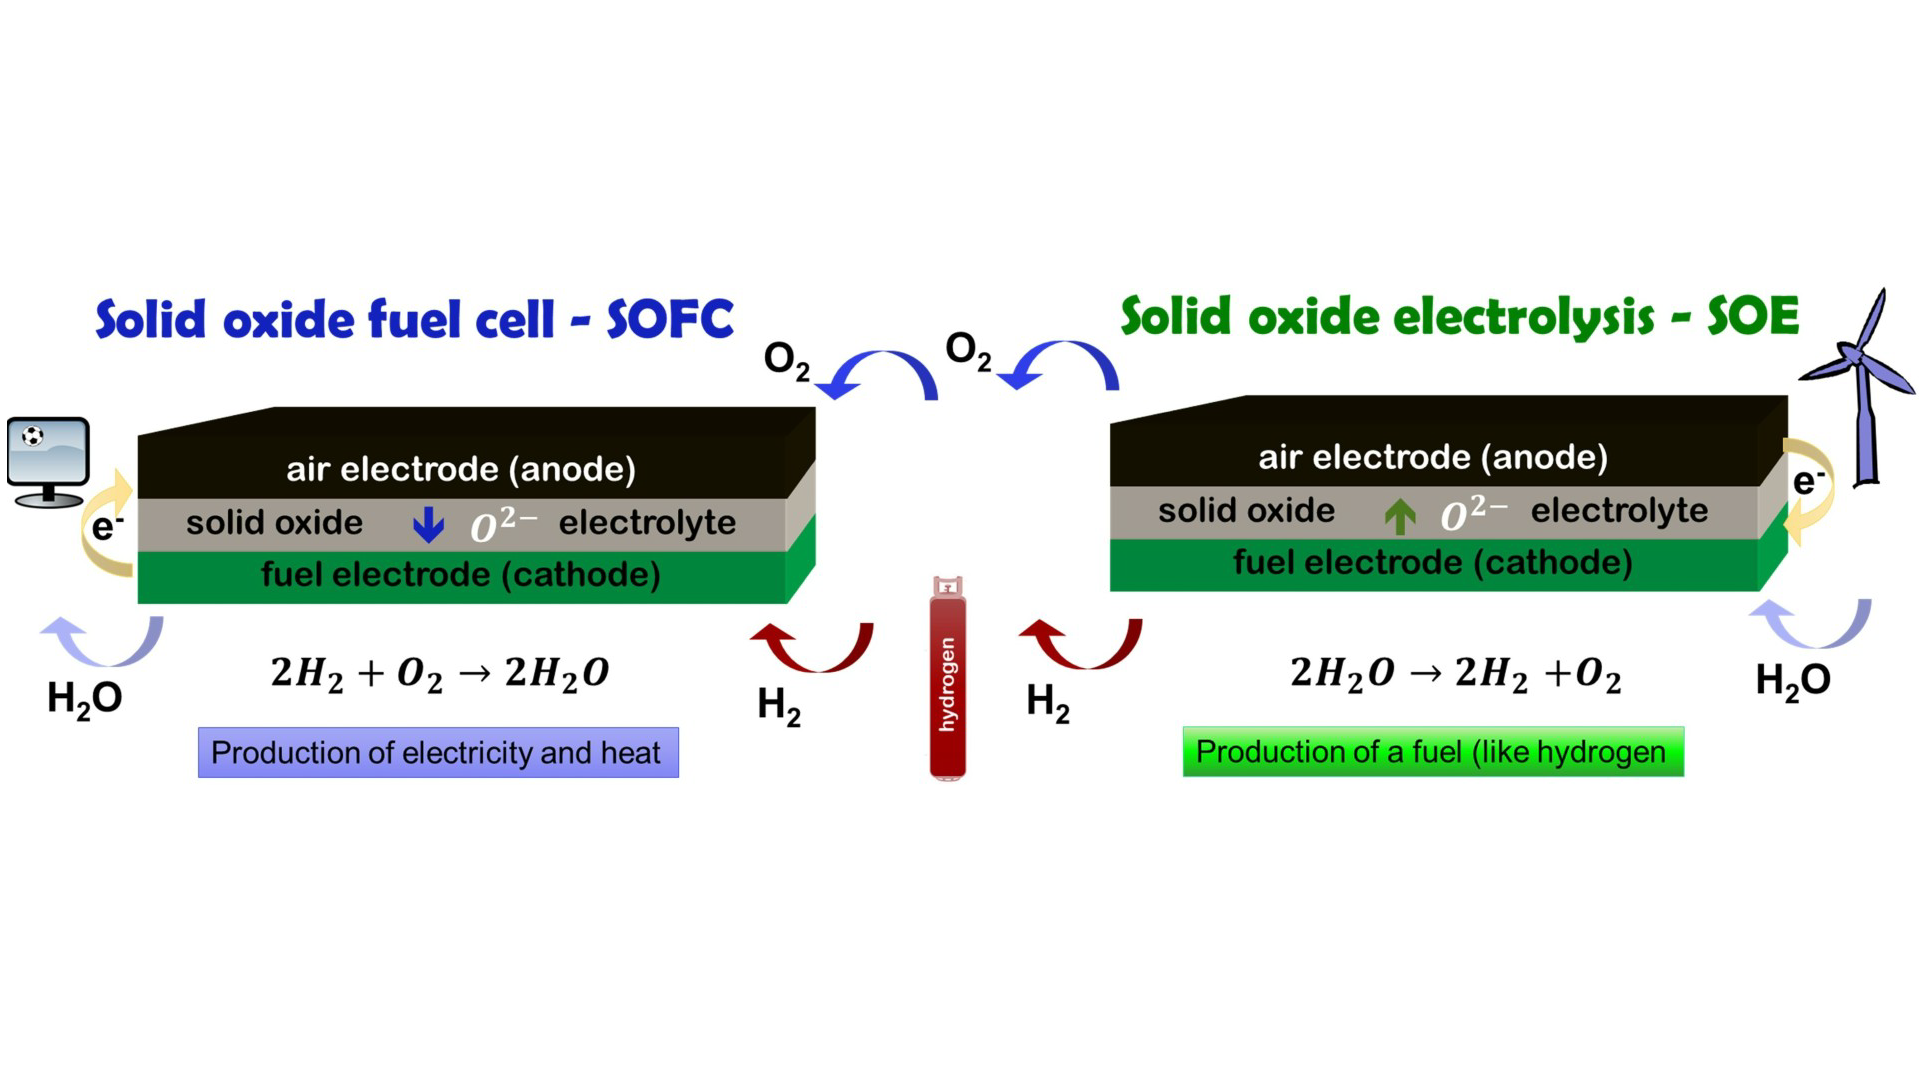 Solid oxide cell and solid oxide electrolysis